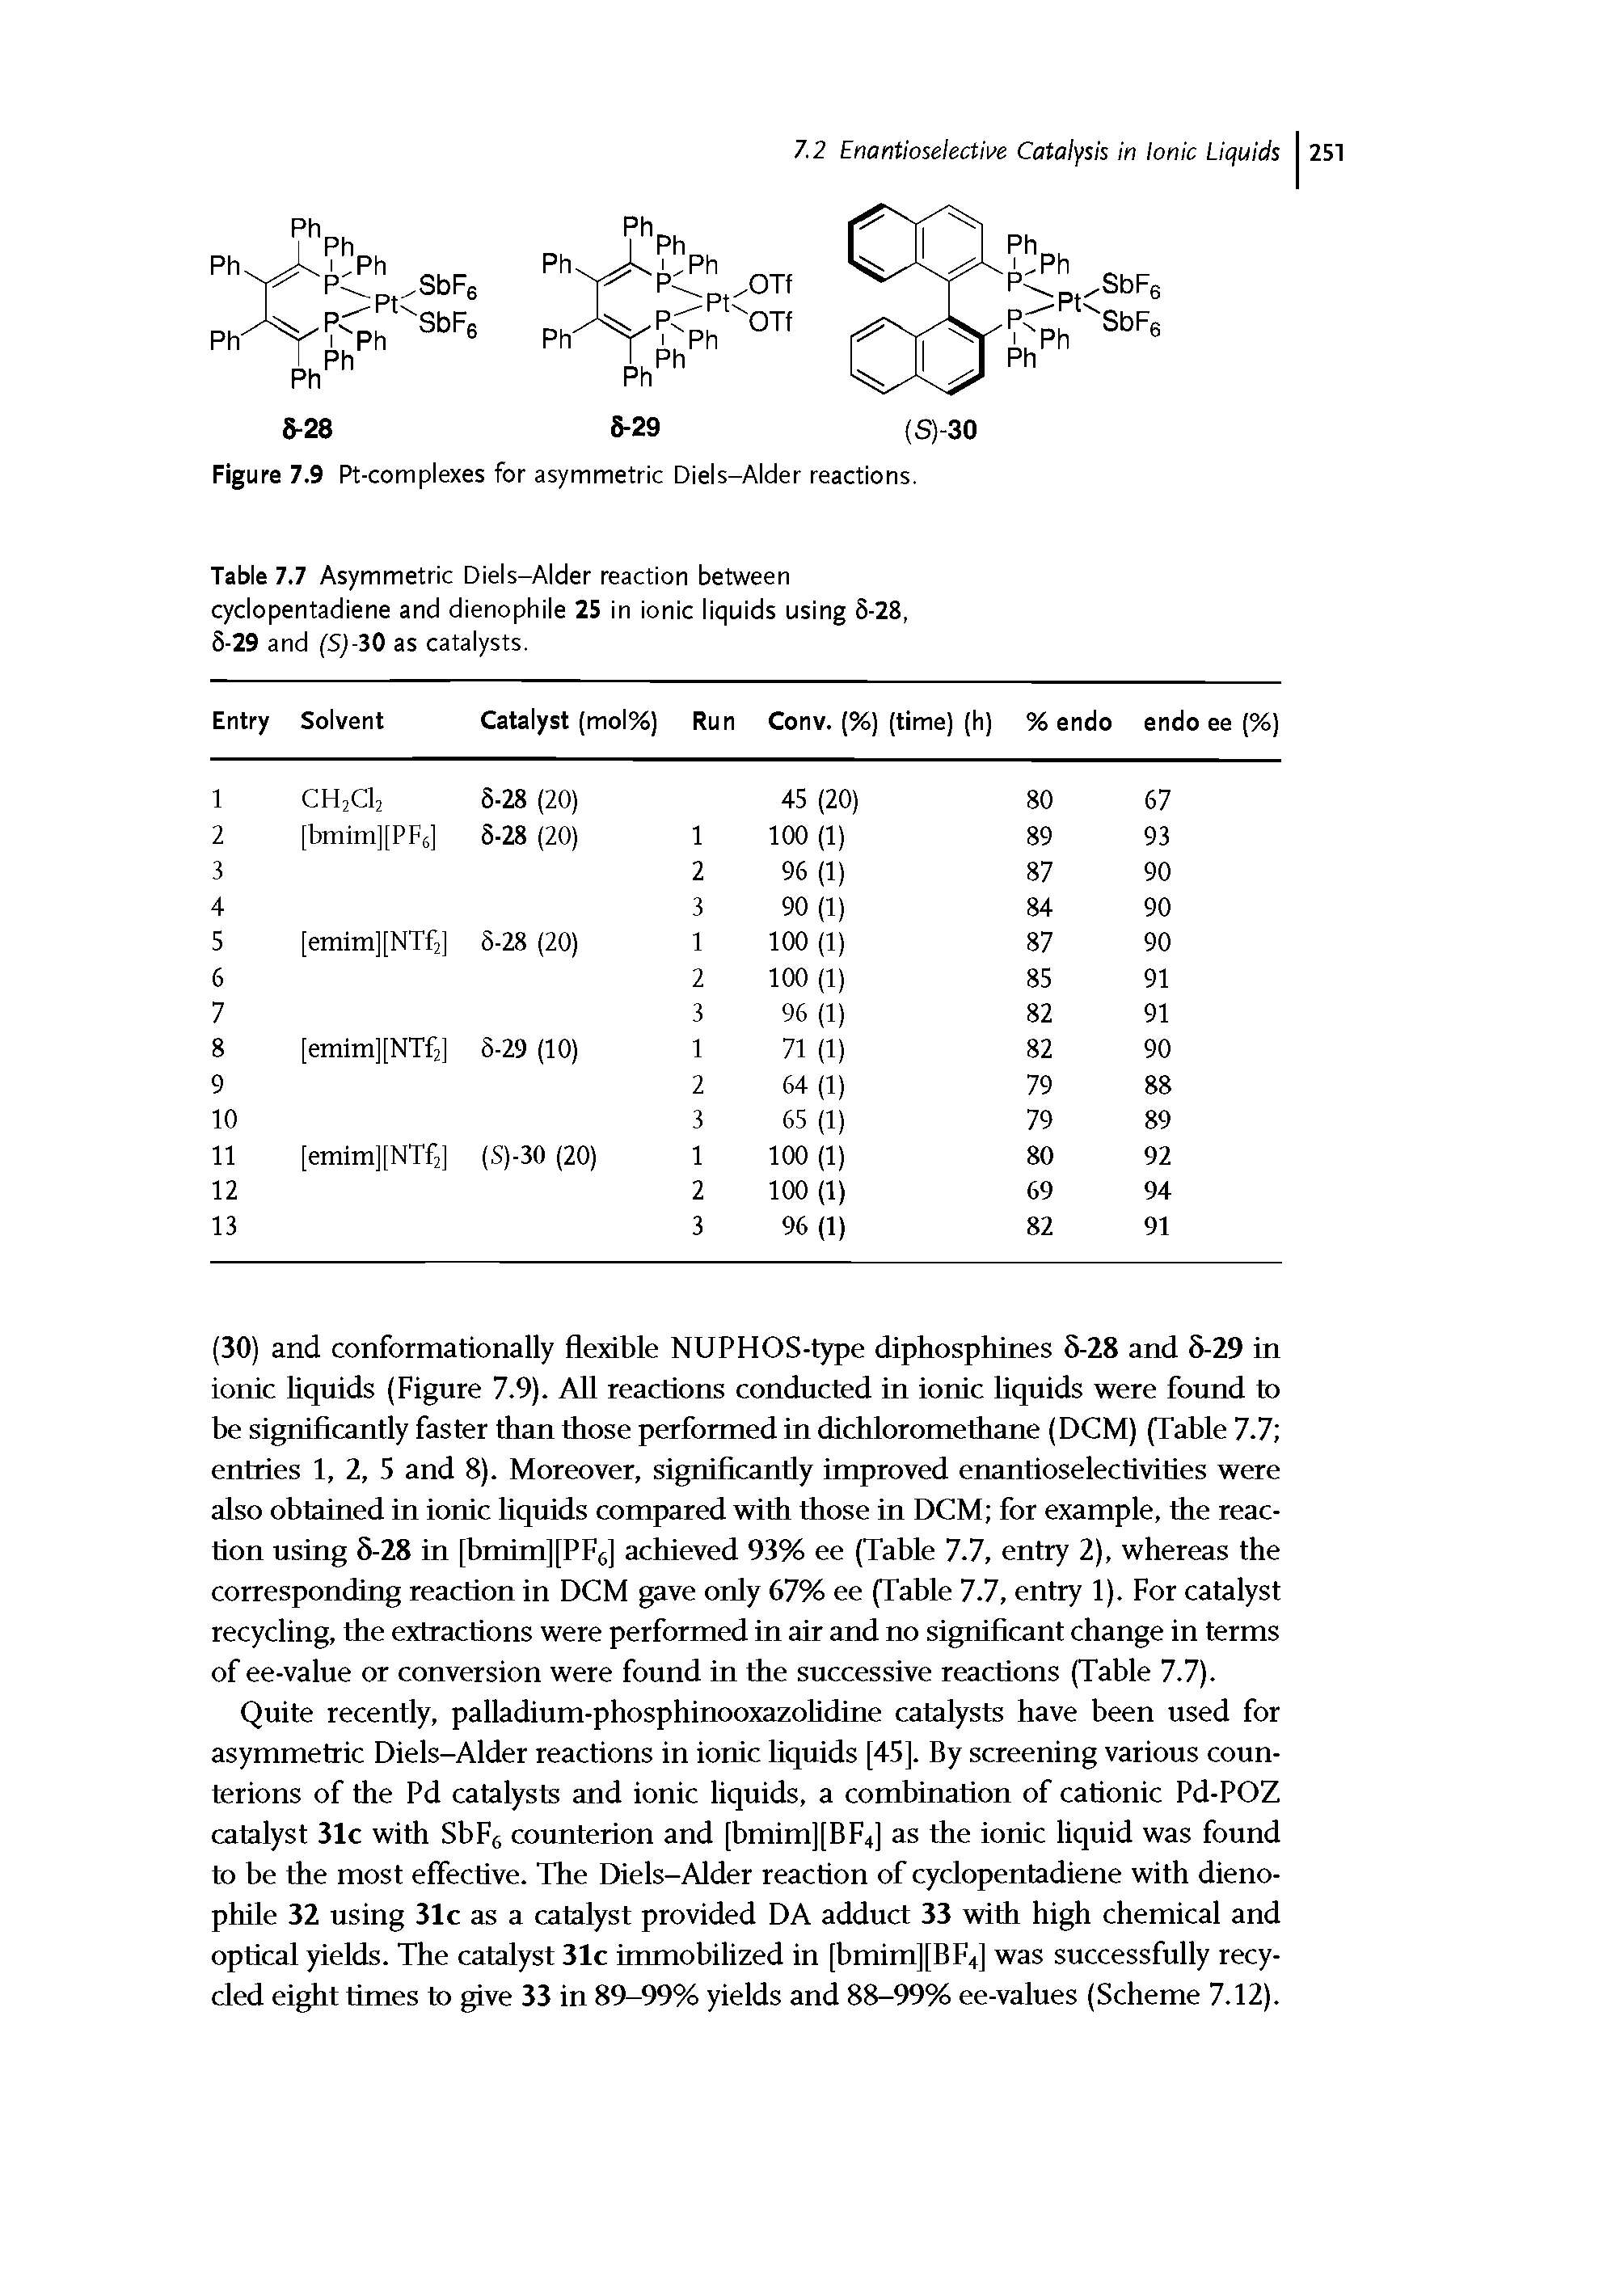 Table 7.7 Asymmetric Diels-Alder reaction between cyclopentadiene and dienophile 25 in ionic liquids using 5-28, 5-29 and (S)-30 as catalysts.